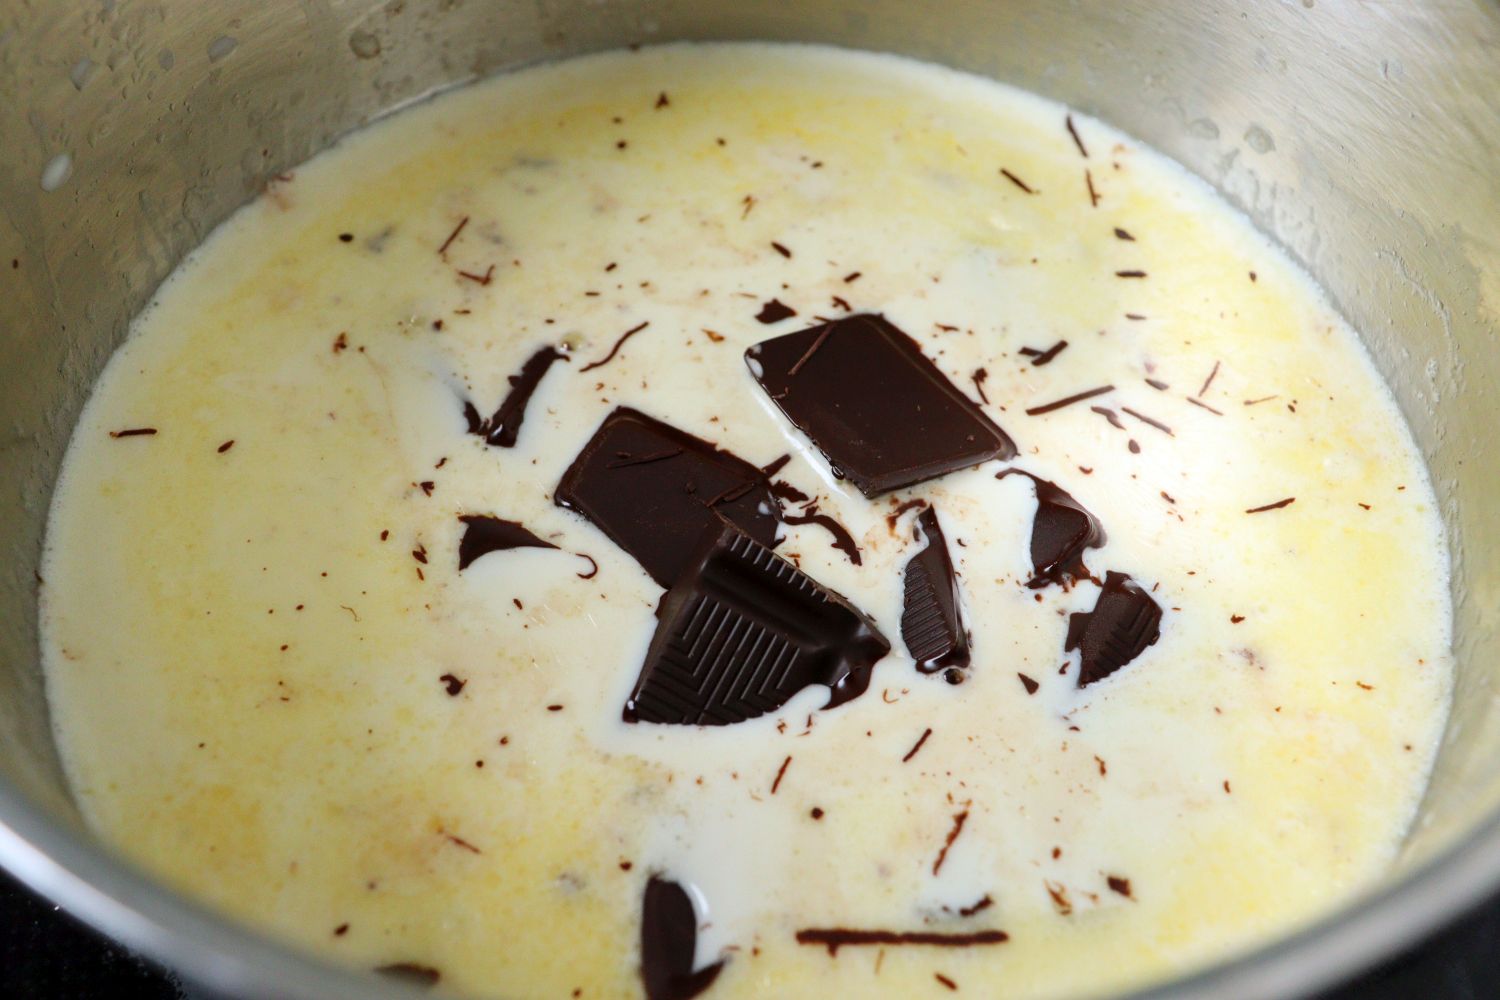 Nina Recipes - Chocolate Mousse (Mousse au chocolat): adding the chocolate pieces to the hot cream in the pot 